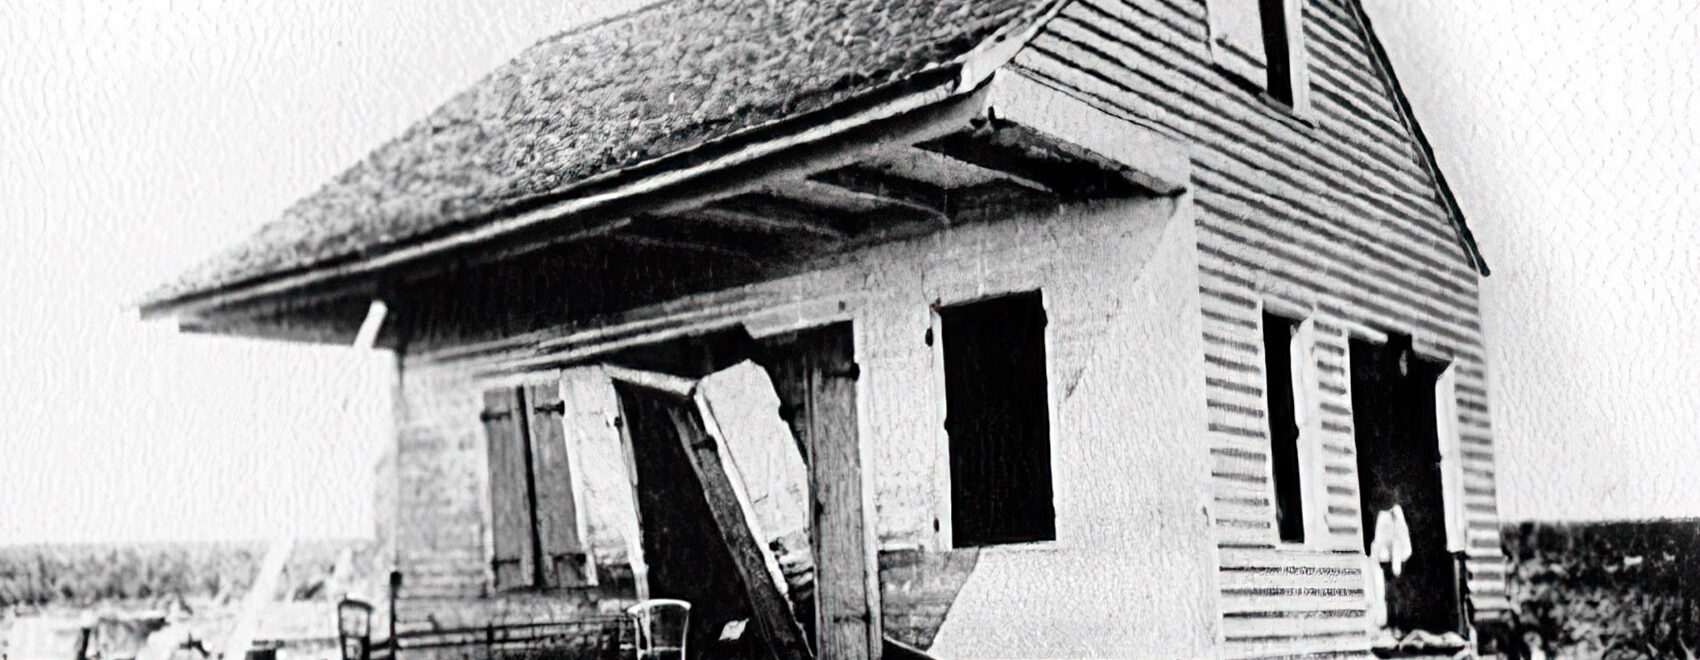 old wooden house with hurricane damage in black and white